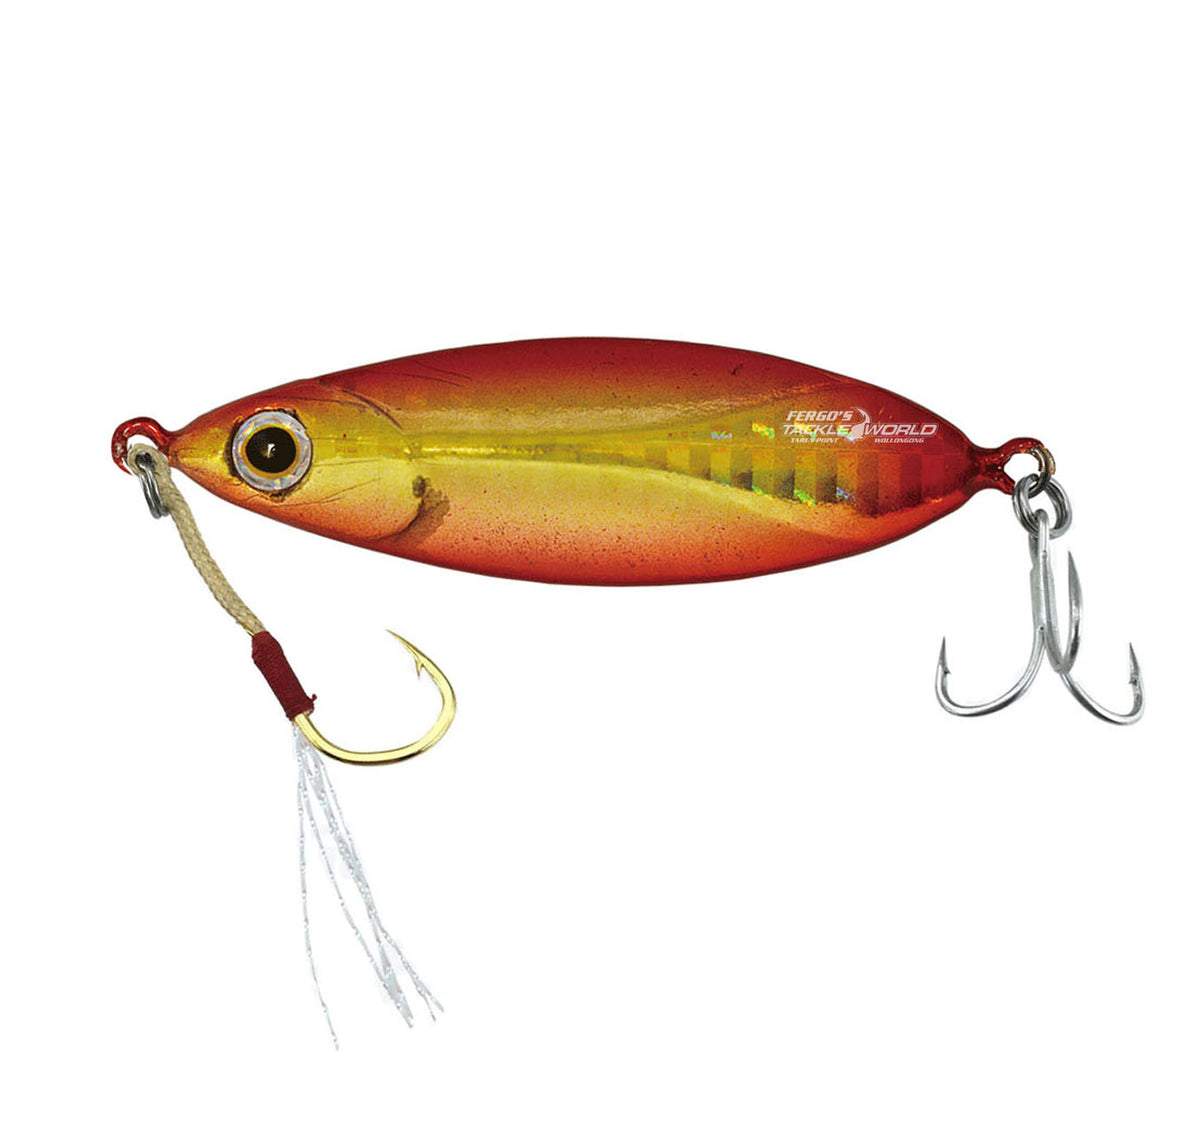 Jackson Gallop Assist Slow Fall 18g Lures